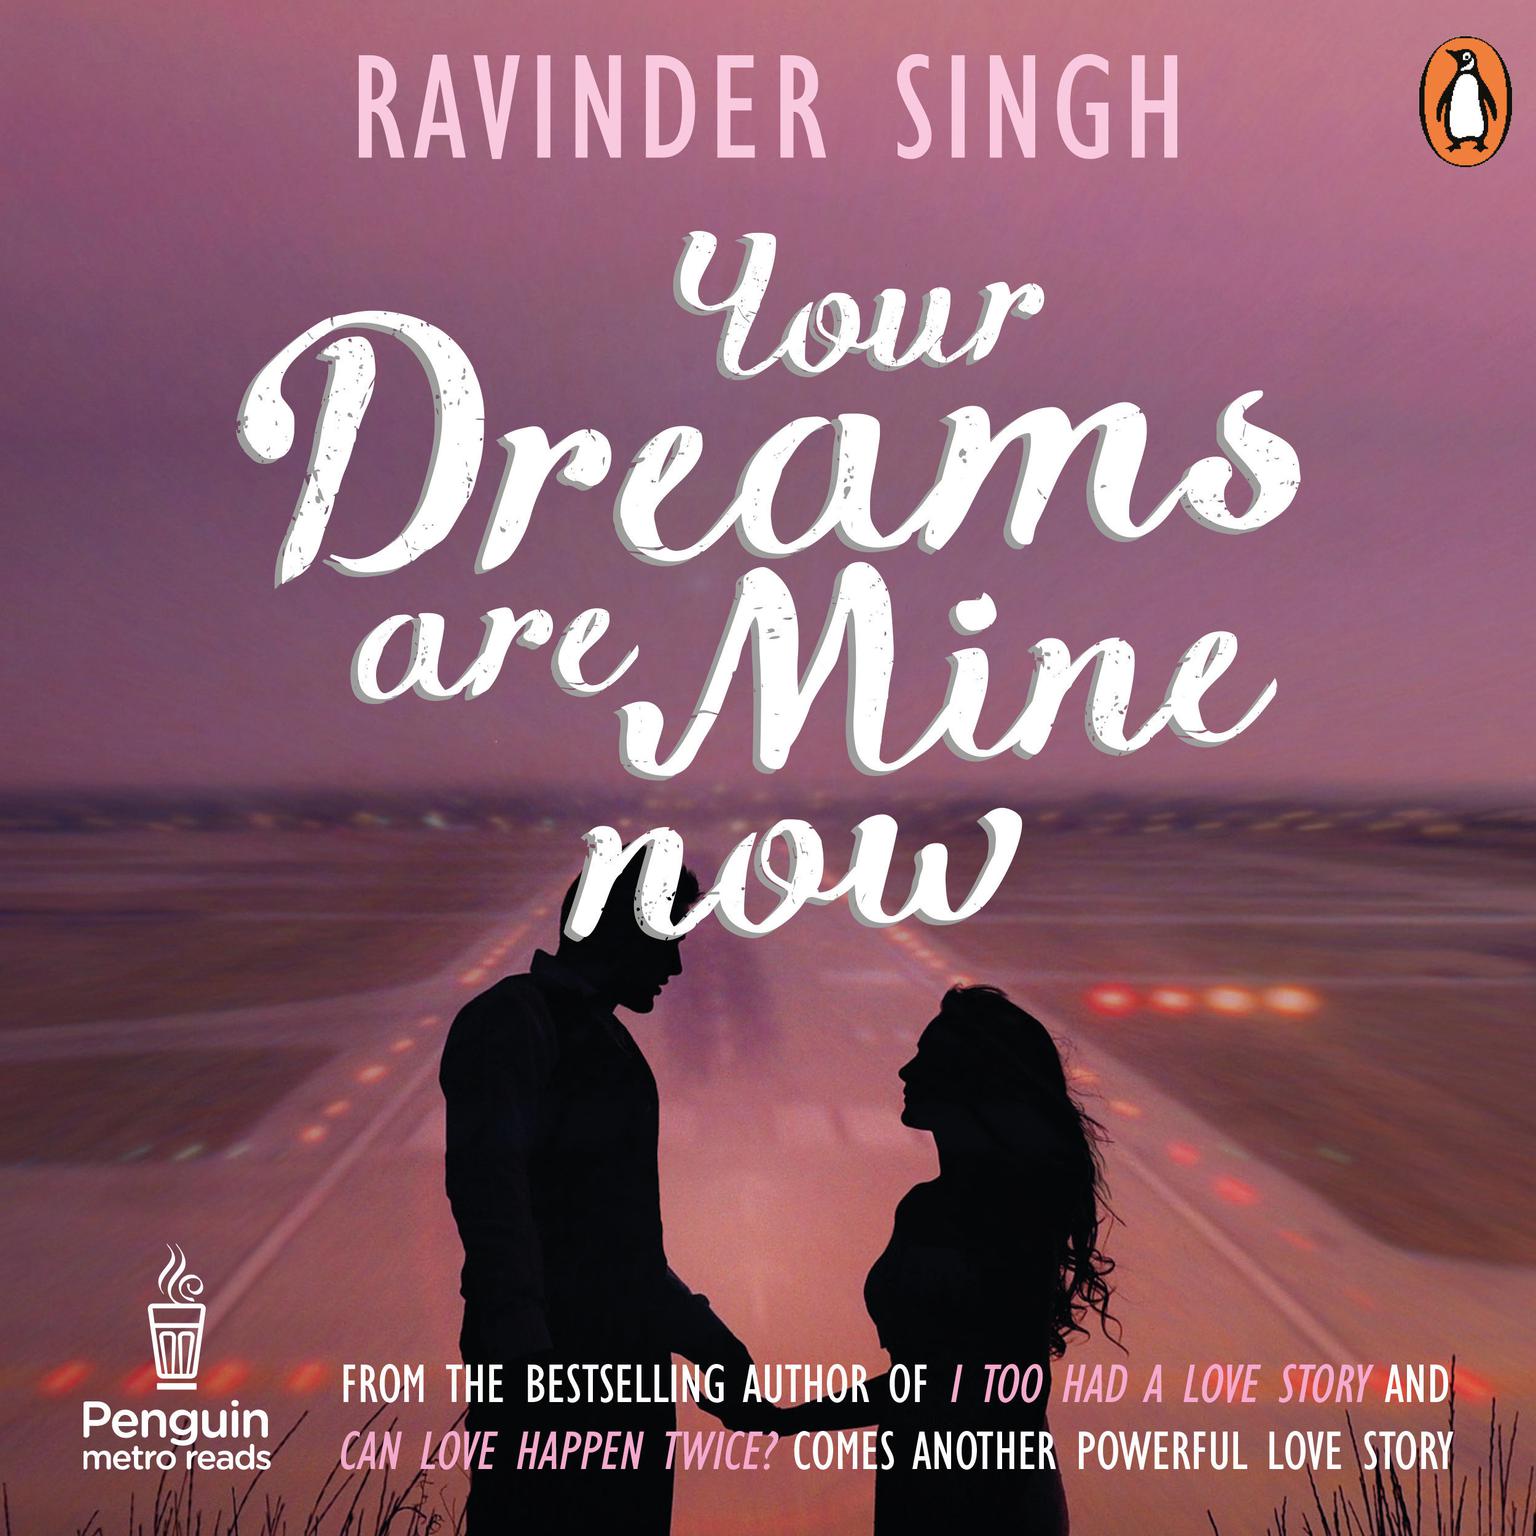 Your Dreams Are Mine Now Audiobook, by Ravinder Singh